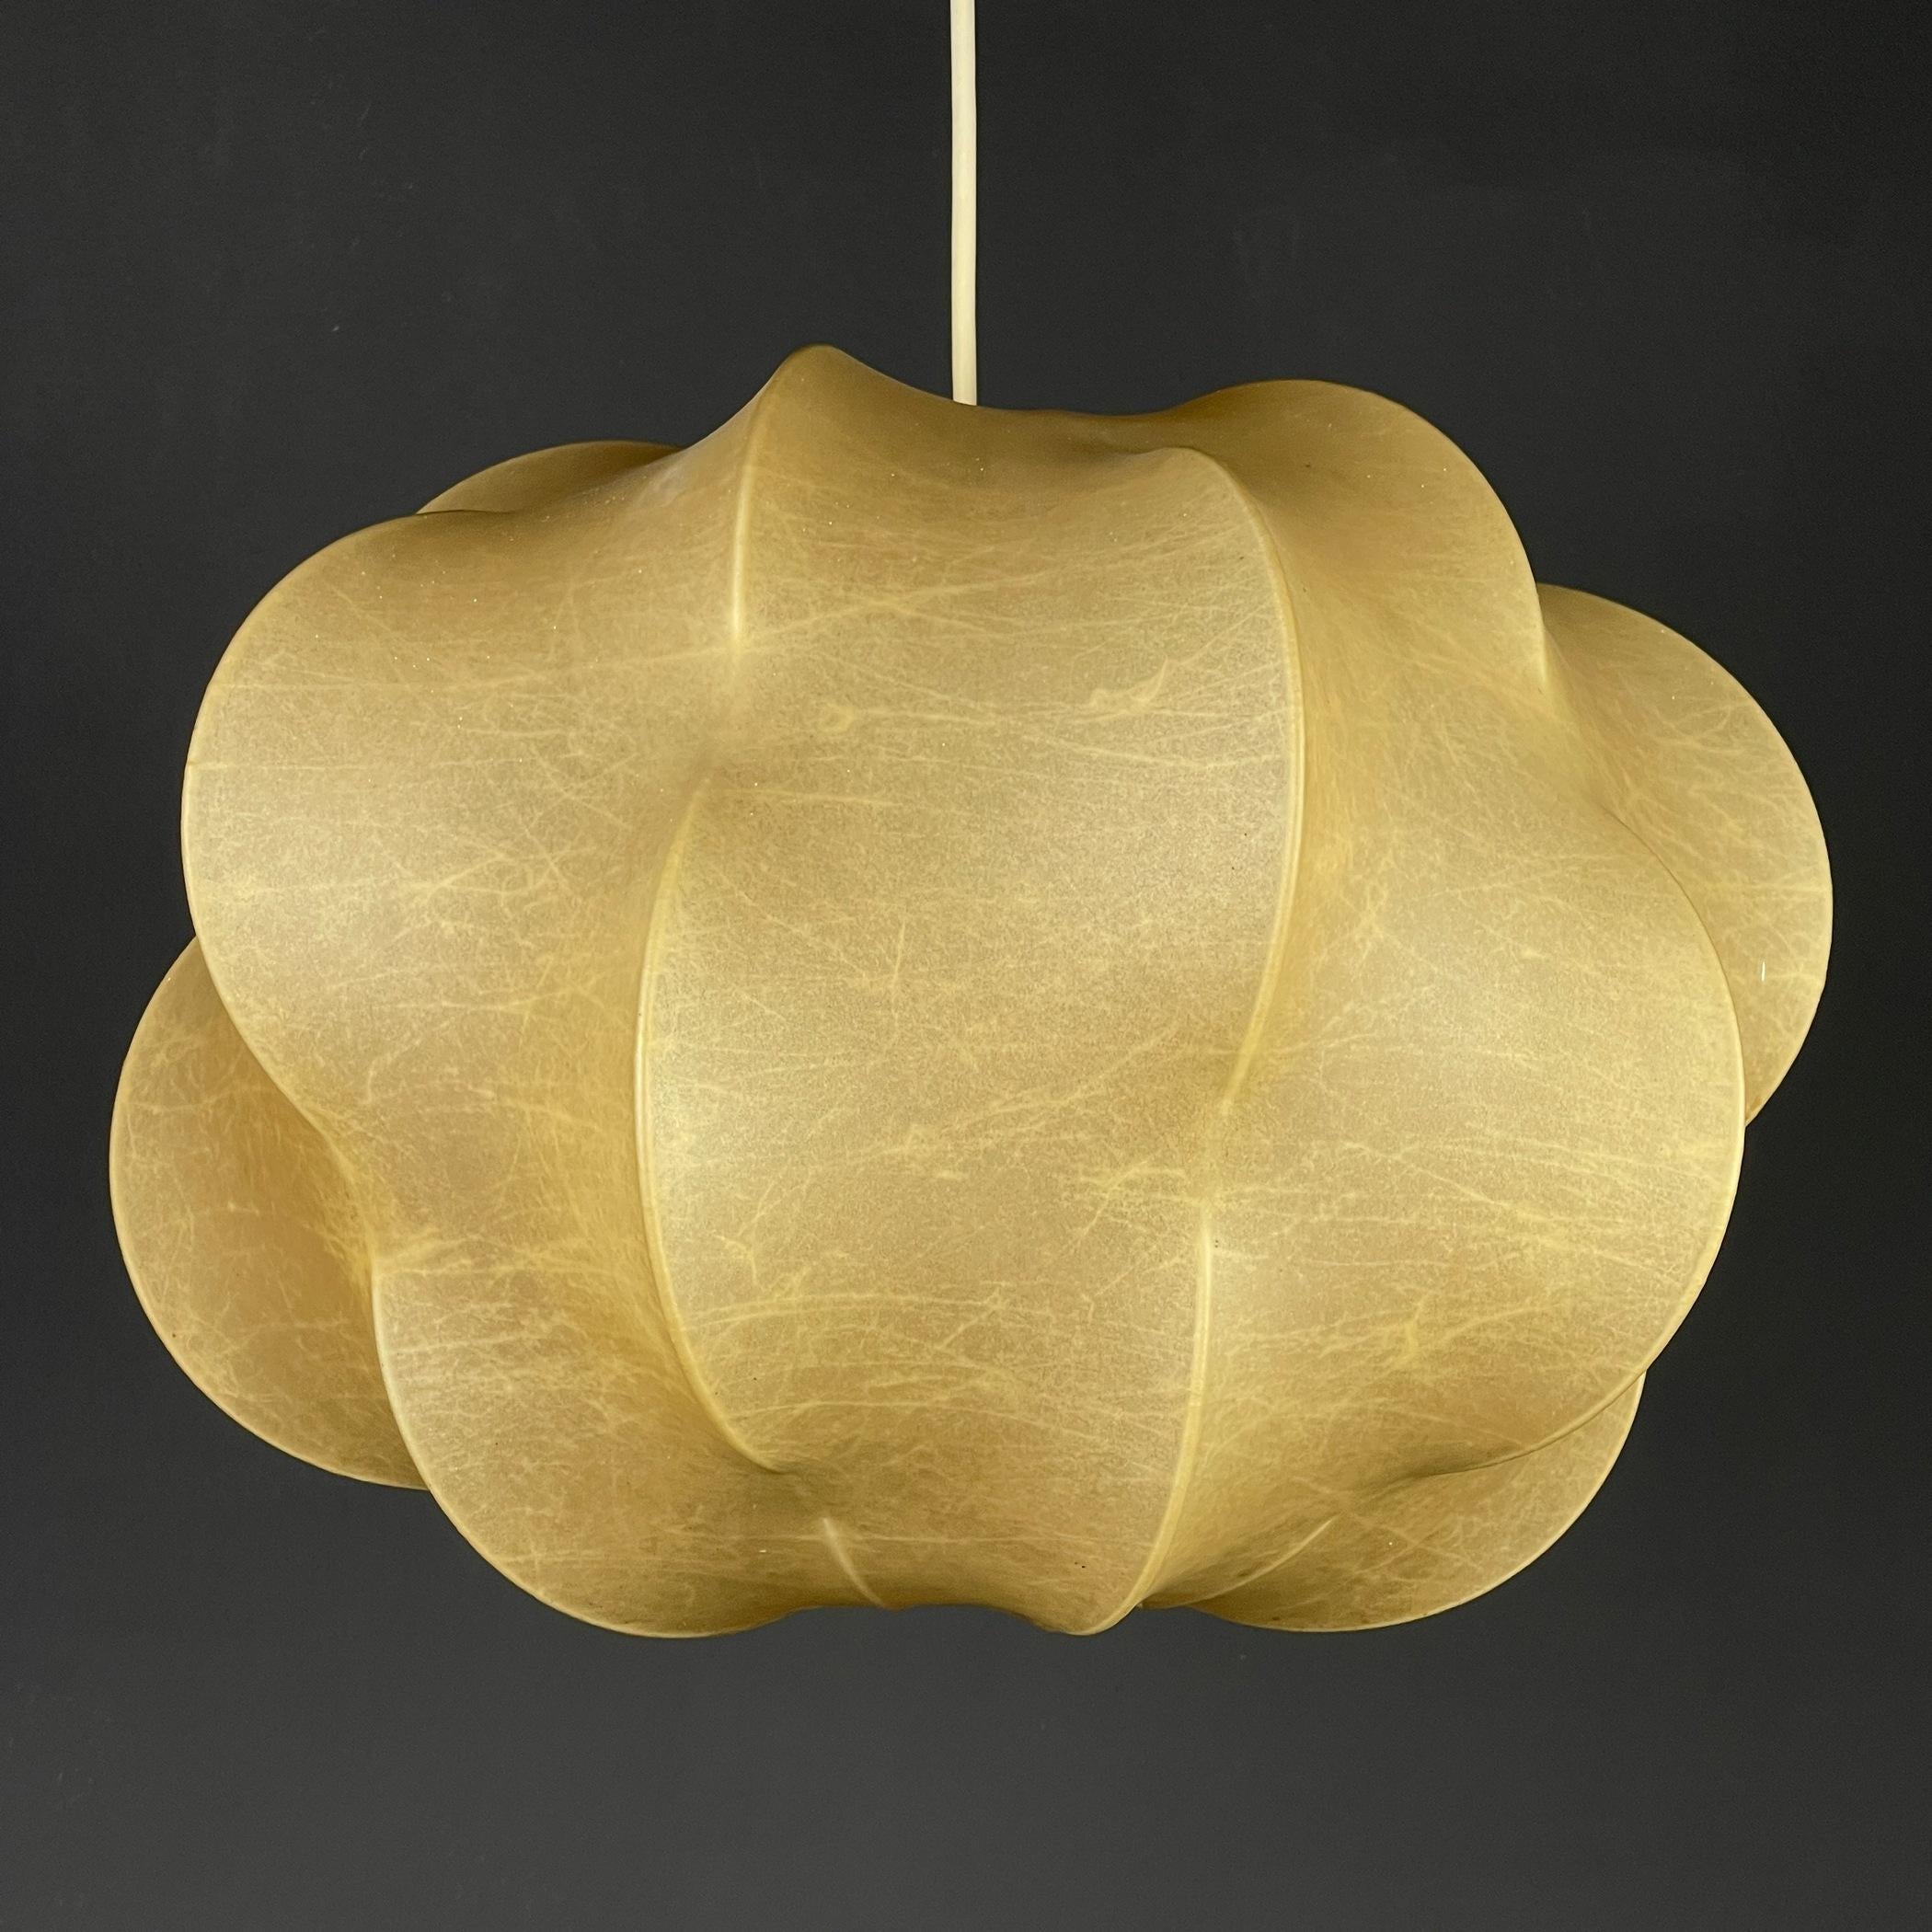 20th Century Nuvola Cocoon Chandelier by Tobia Scarpa for Flos, Italy 1962 For Sale